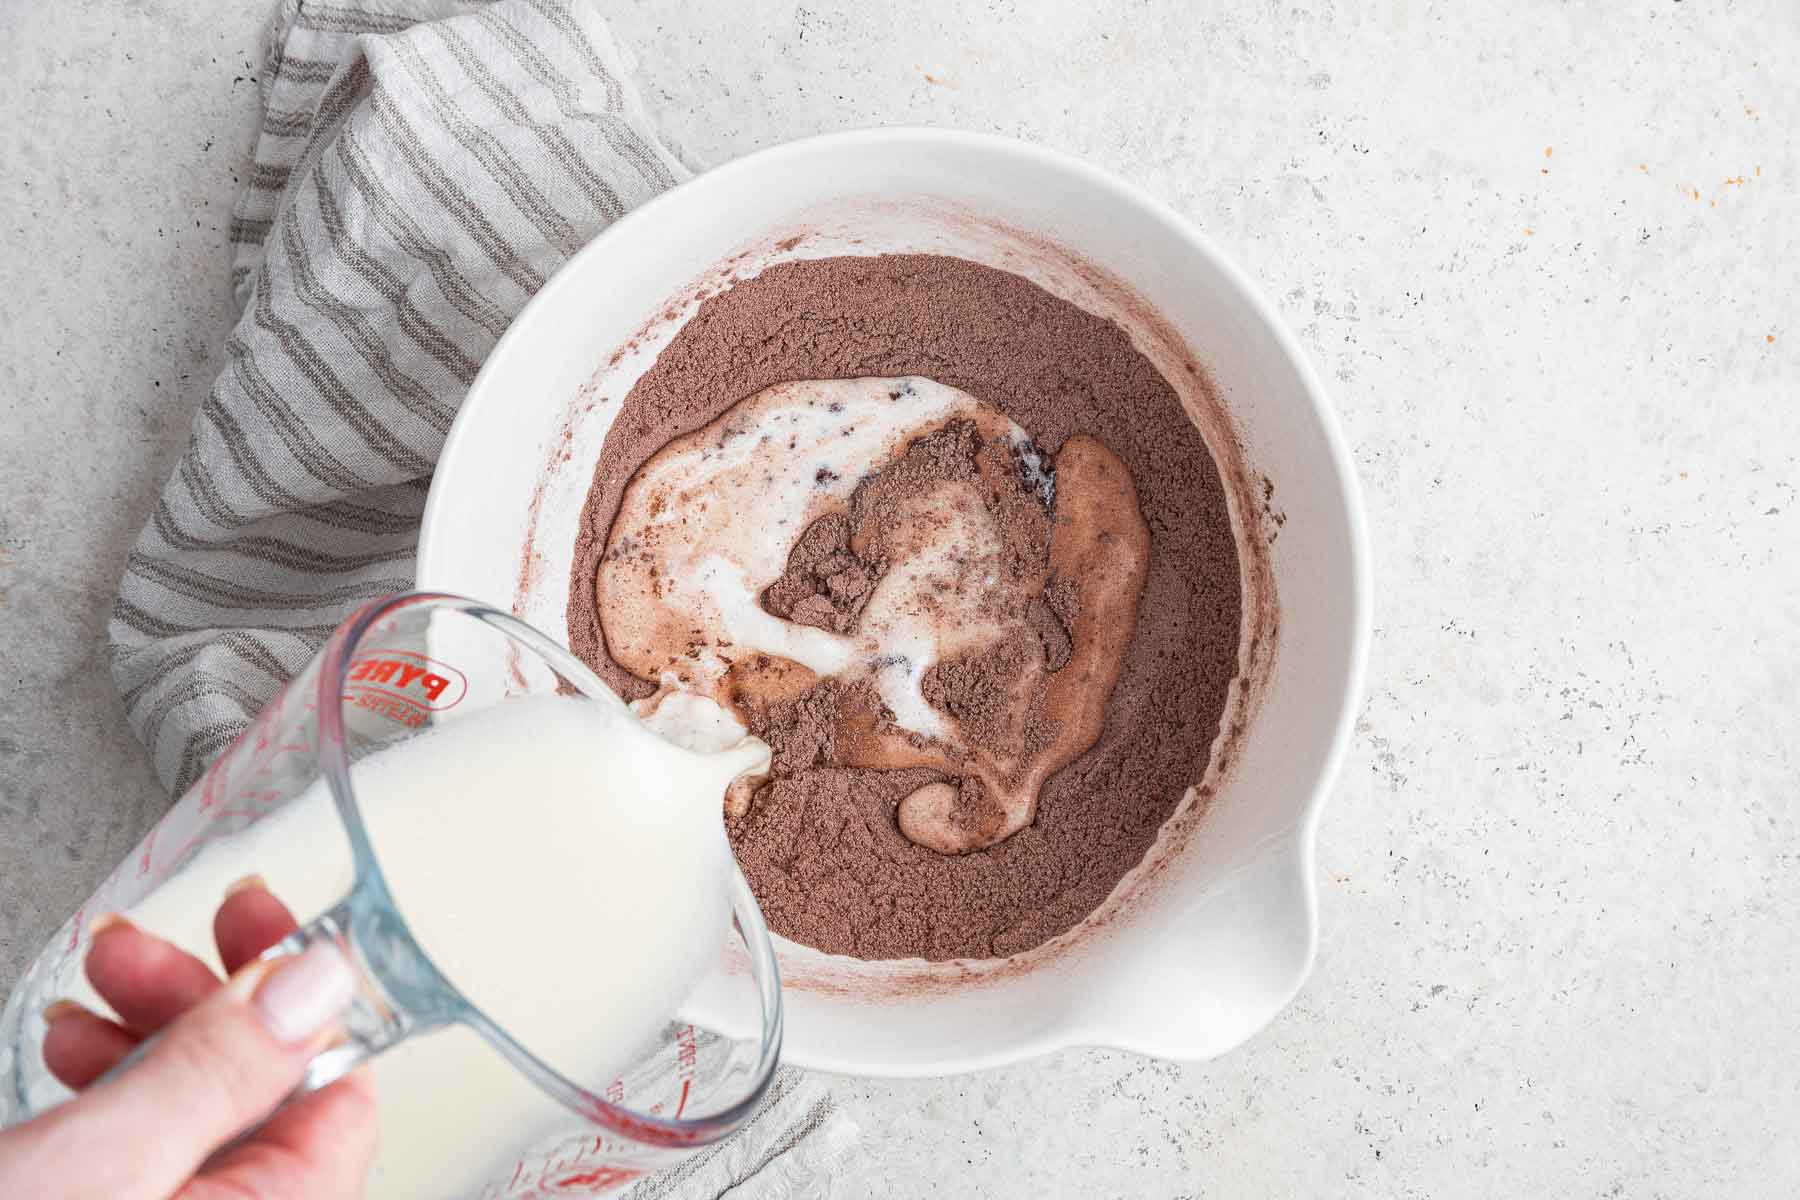 Pouring milk into a cocoa powder mixture in a white bowl.